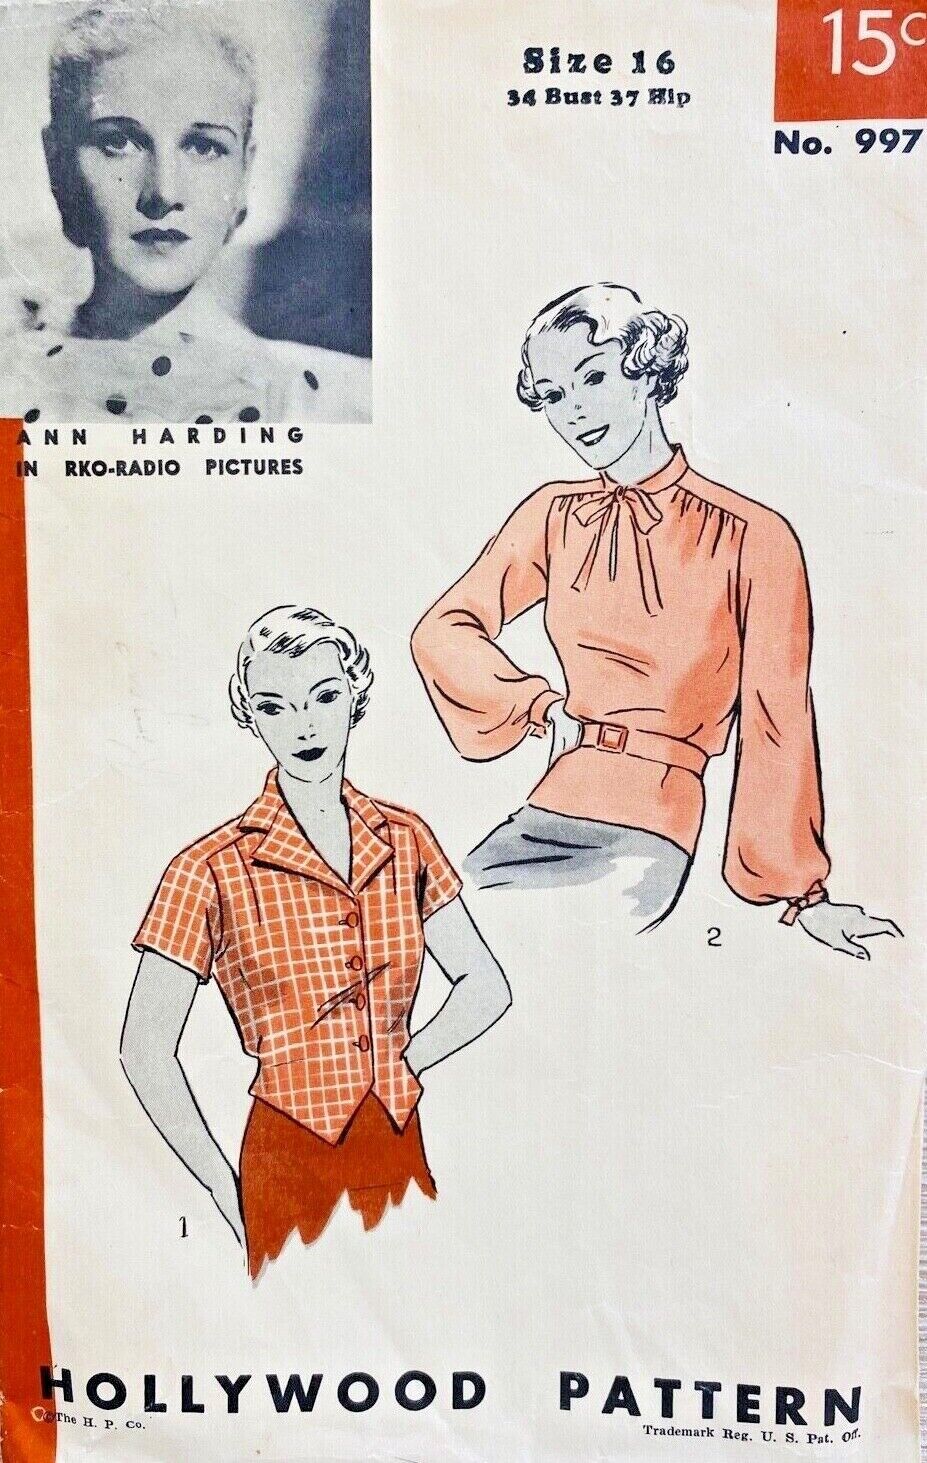 30s HOLLYWOOD PATTERN 997 ANN HARDING SIZE 16 BLOUSES *VERIFIED COMPLETE